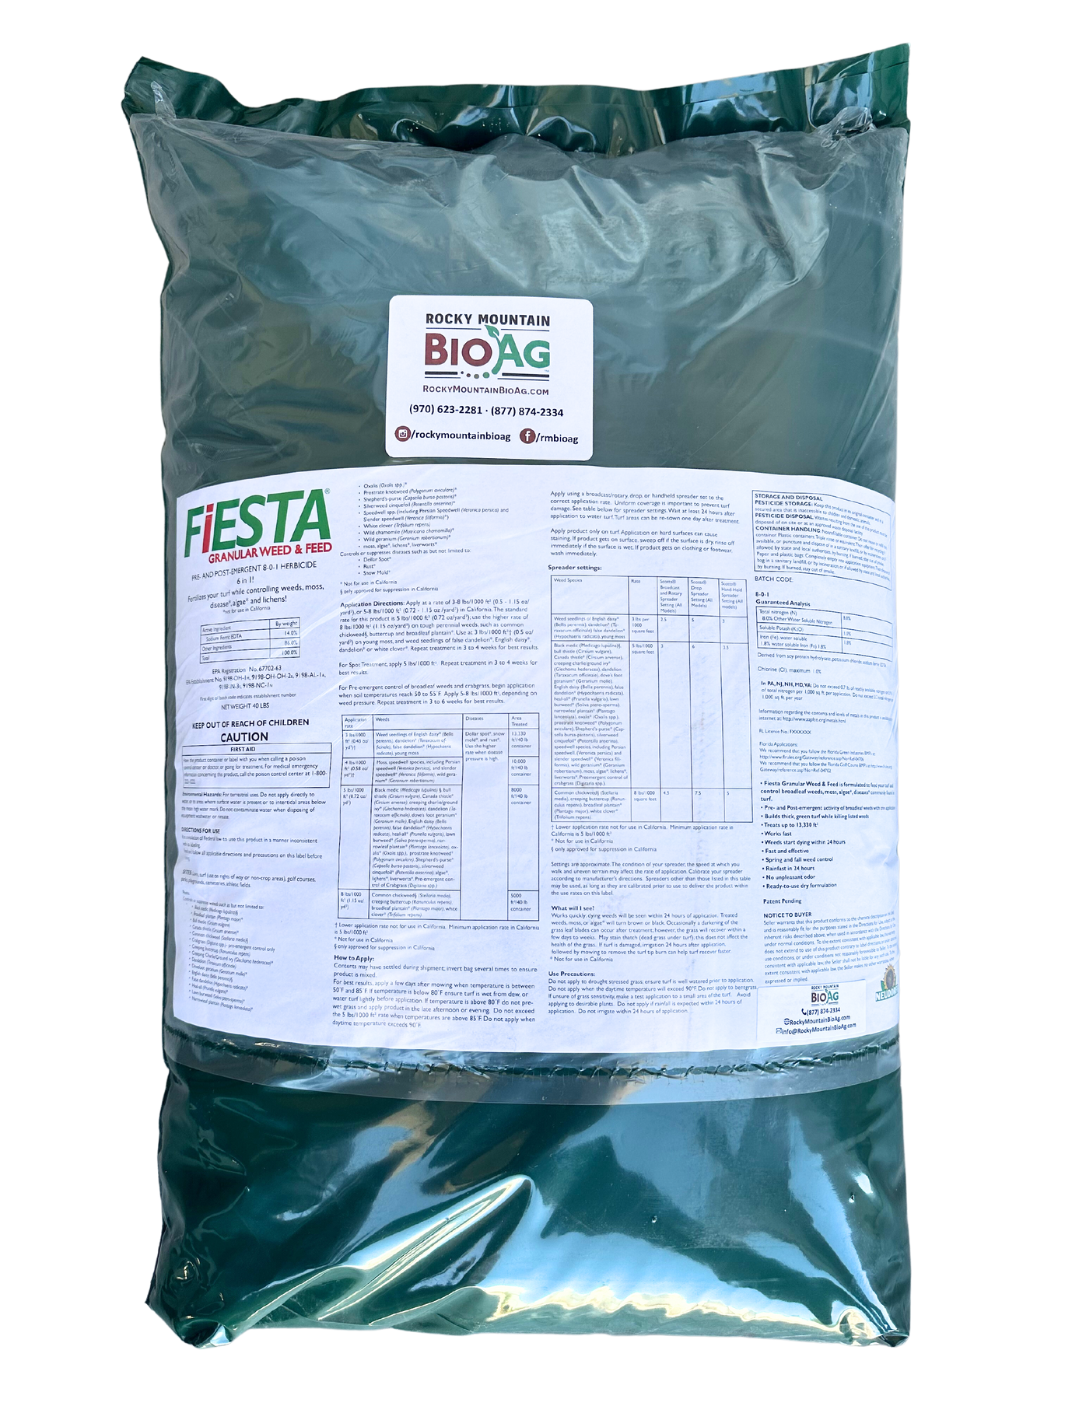 Picture of a 40 pound bag of Fiesta Granular Weed & Feed